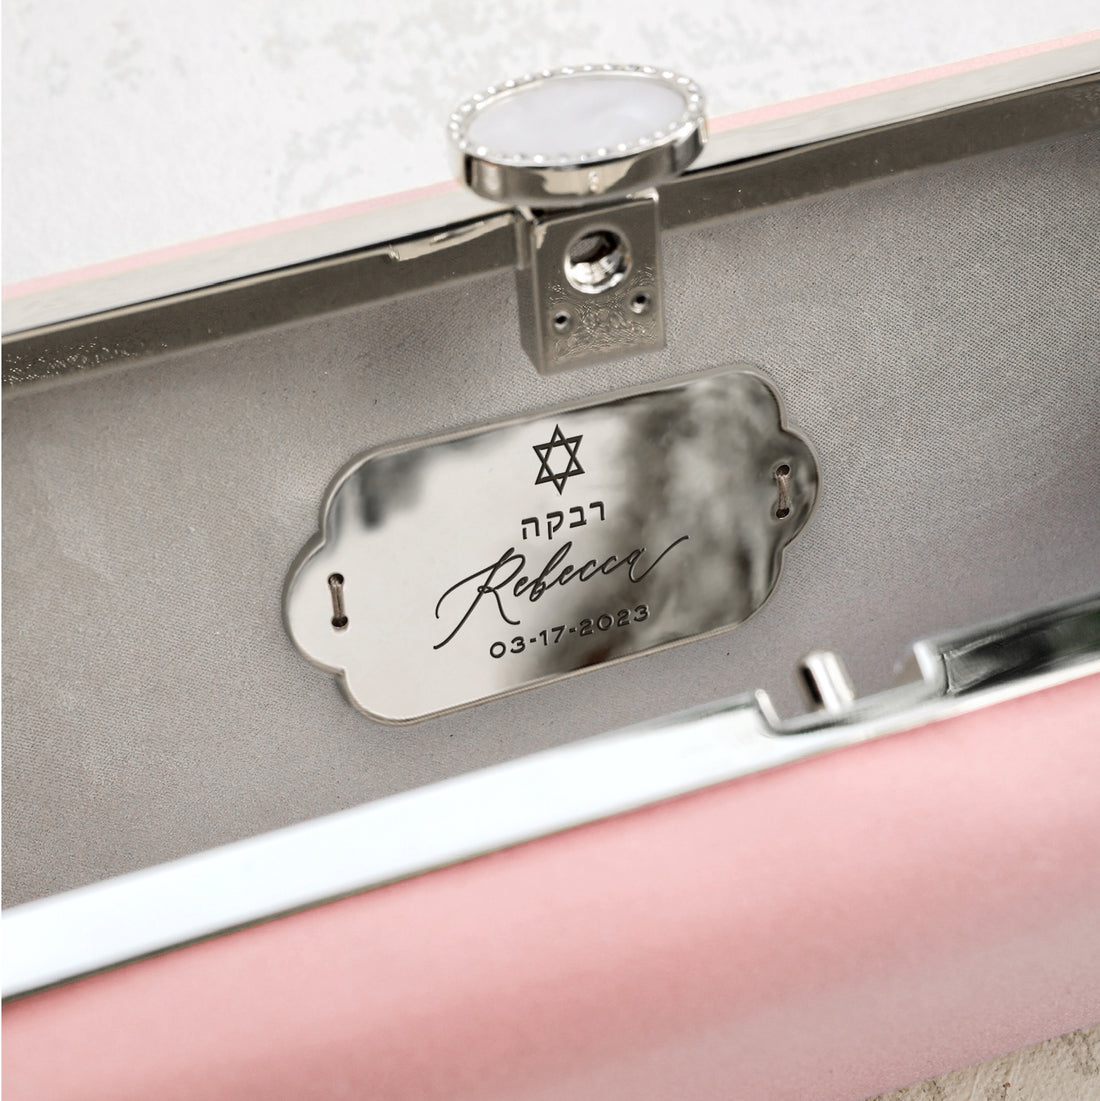 A personalized gift - the Bat Mitzvah Personalized Bella Clutch Petite, an elegant pink leather case with a silver plate on it from The Bella Rosa Collection.